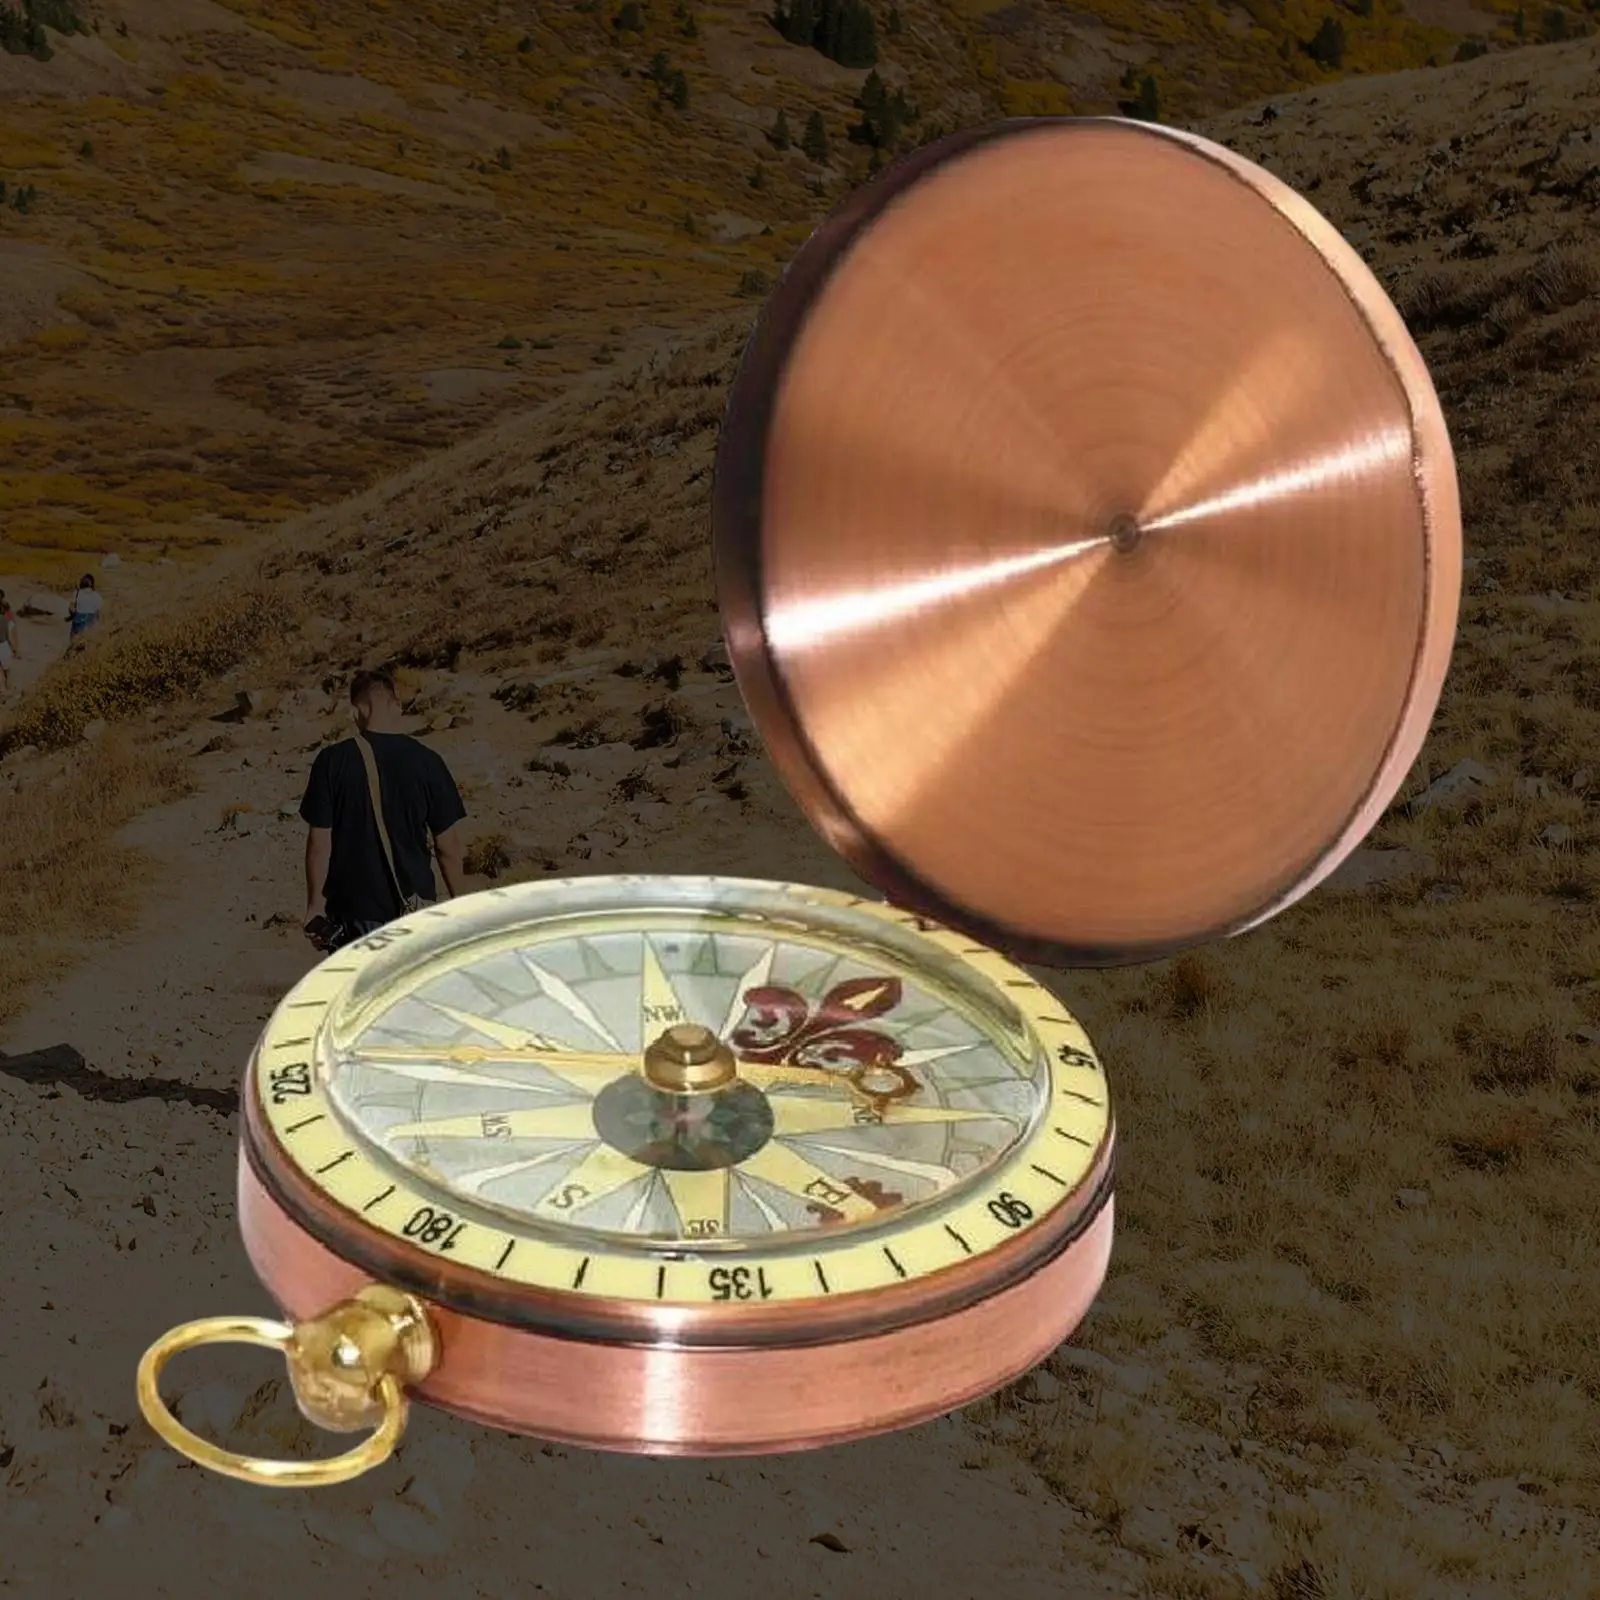 Retro Pocket Copper Compass Clamshell Compass Handheld Accurate Old Fashioned for Camping Survival Outdoor Hiking Birthday Gift